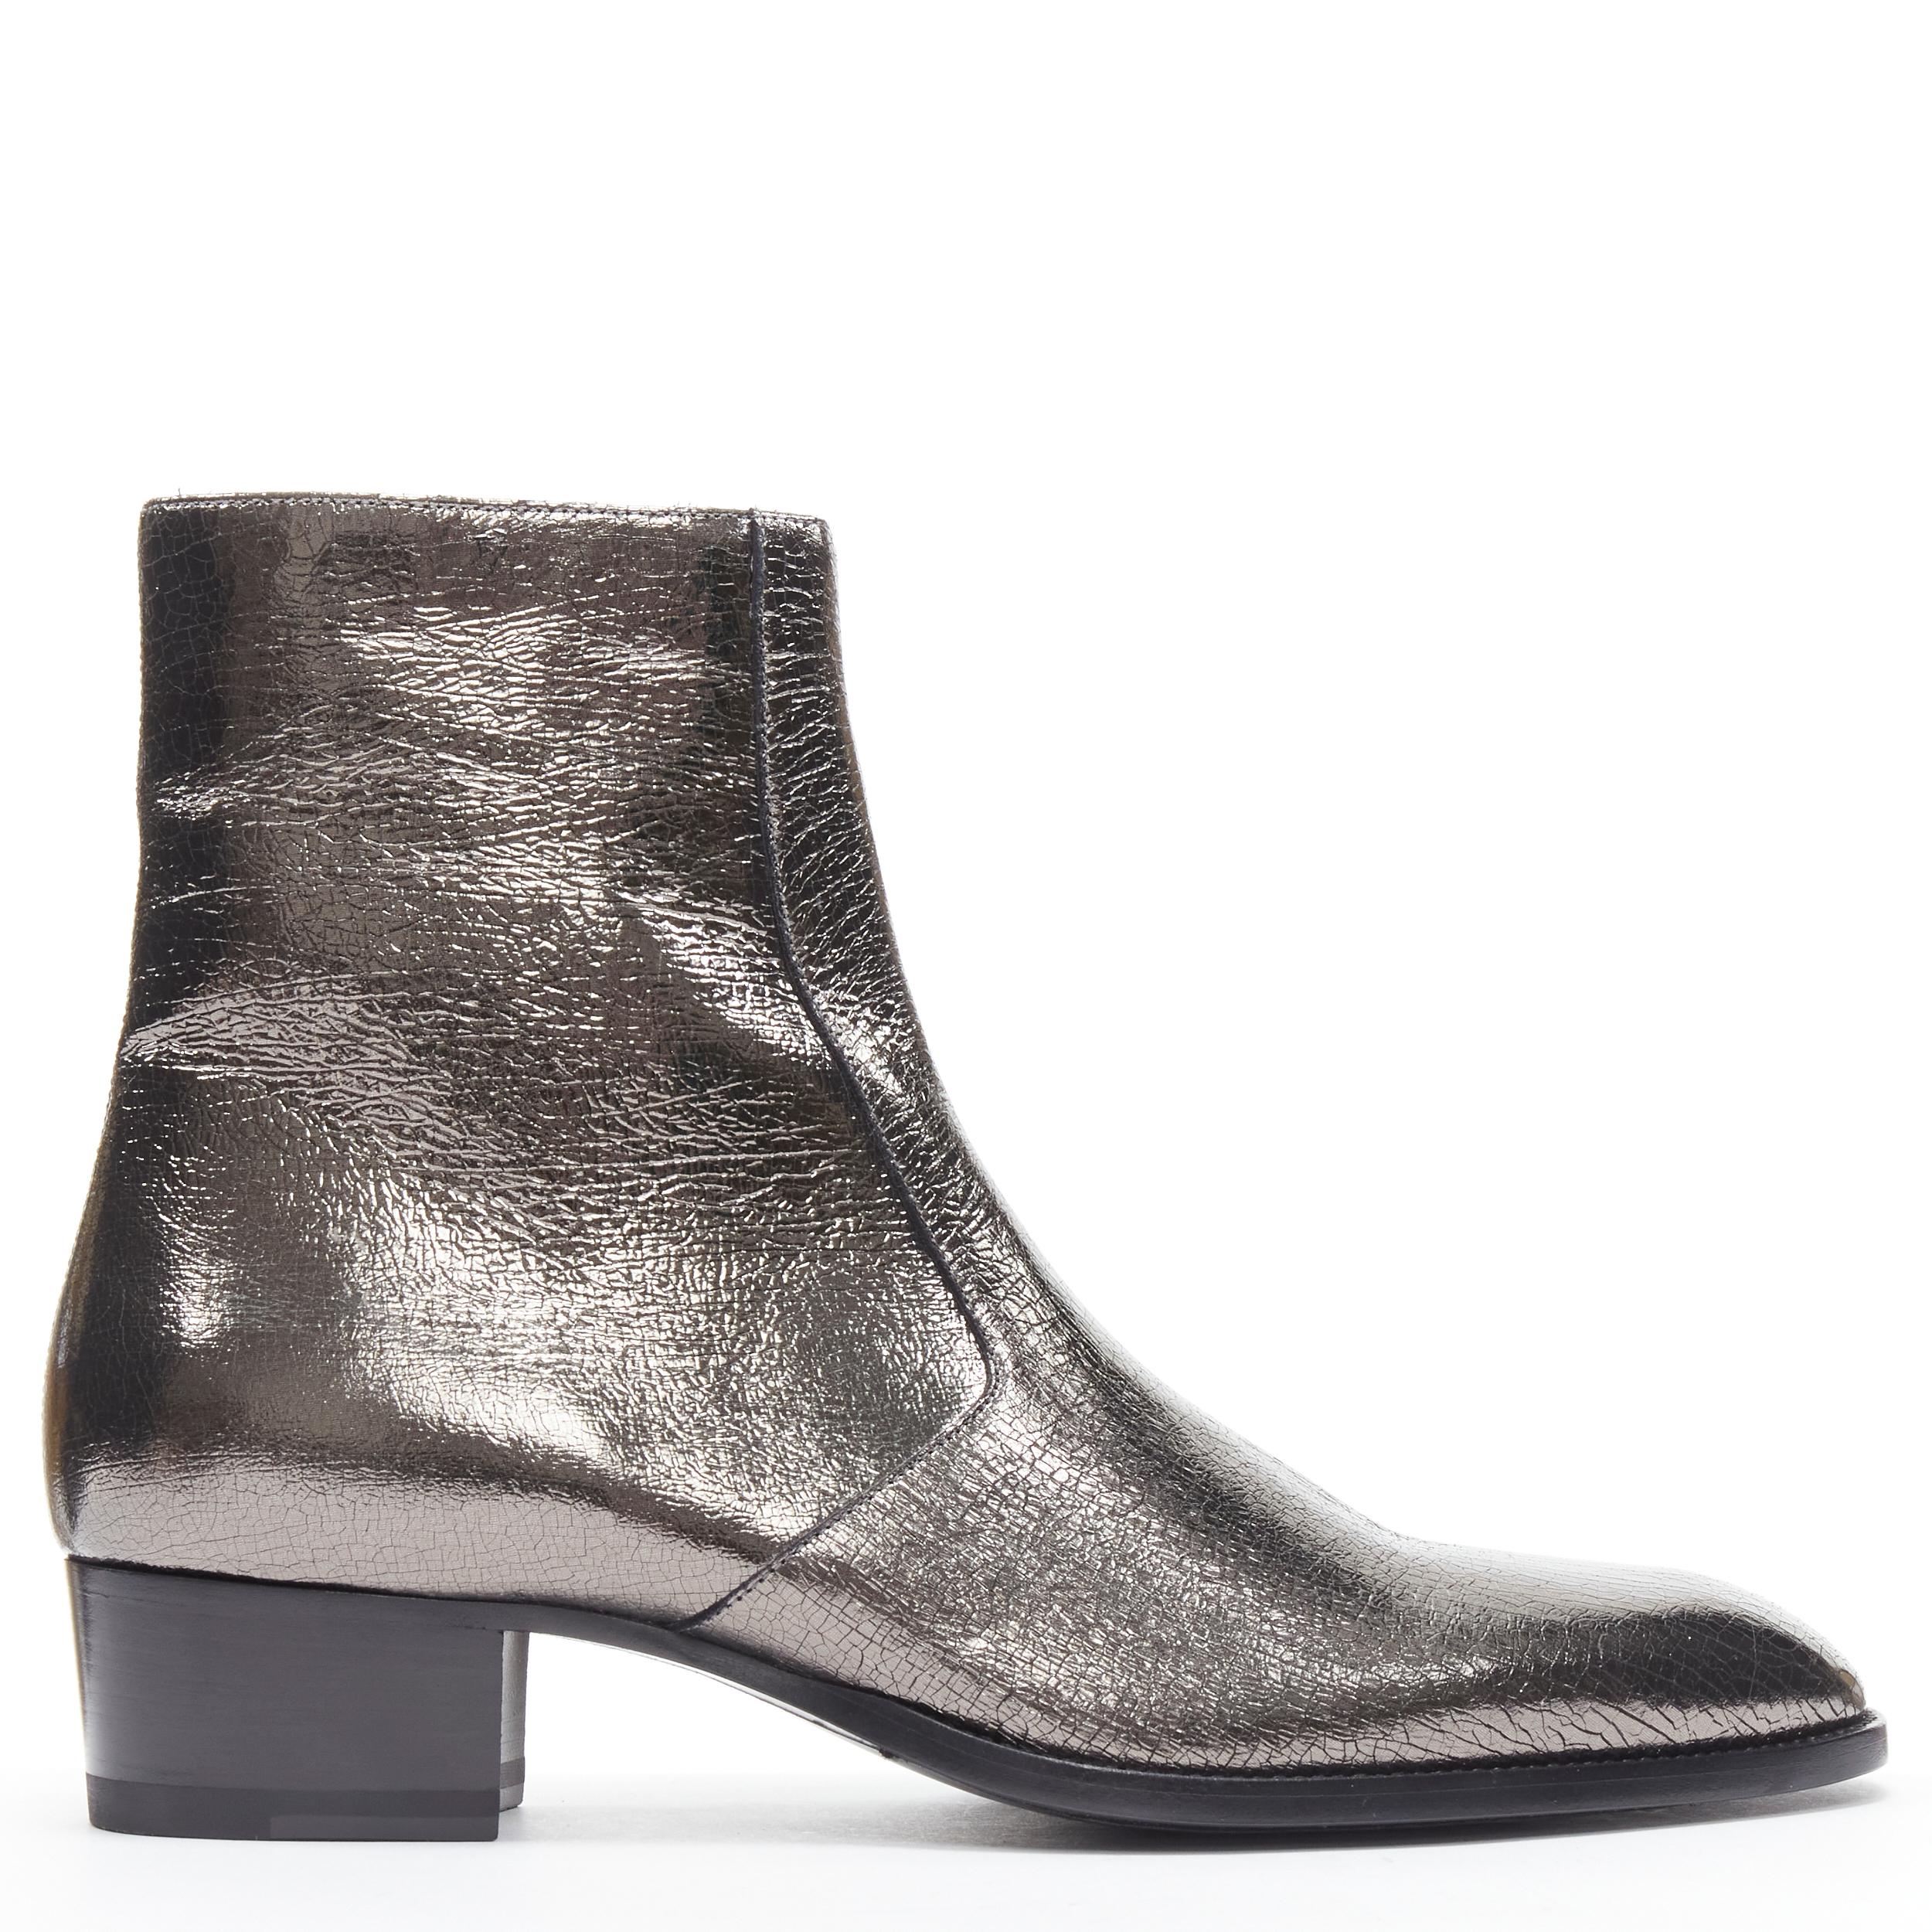 new SAINT LAURENT Wyatt 40 Zip Metal Crack Heavy gunmetal silver boot EU44 
Reference: TGAS/B01793 
Brand: Saint Laurent 
Material: Leather- 
Color: Silver 
Pattern: Solid 
Closure: Zip 
Made in: Italy 

CONDITION: 
Condition: New with tags. 
Comes